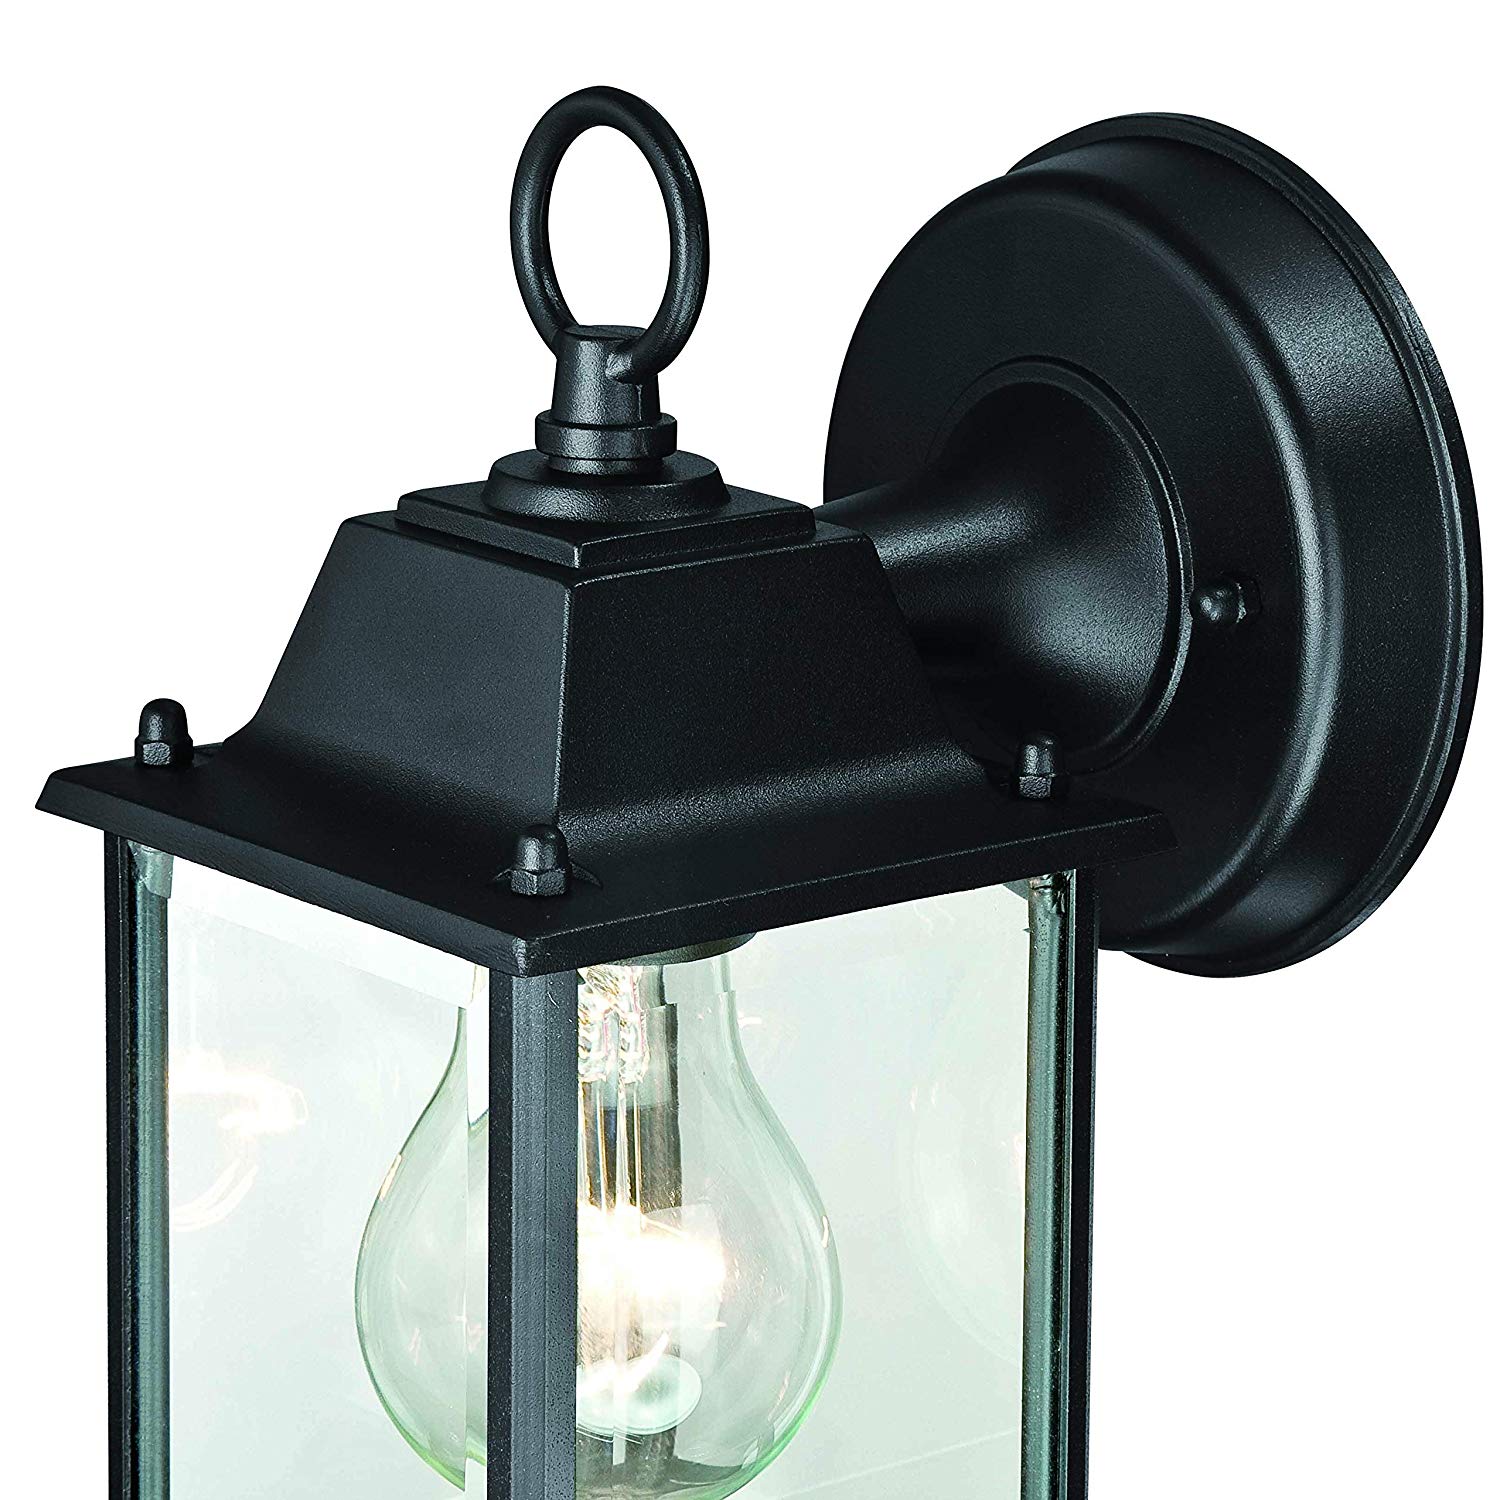 LIT-PaTH Small Outdoor Wall Lantern, Wall Sconce as Porch Lighting Fixture, E26 Base 100W Max, Aluminum Housing Plus Glass, Water-Proof and Outdoor Rated, ETL Qualified, 2-Pack